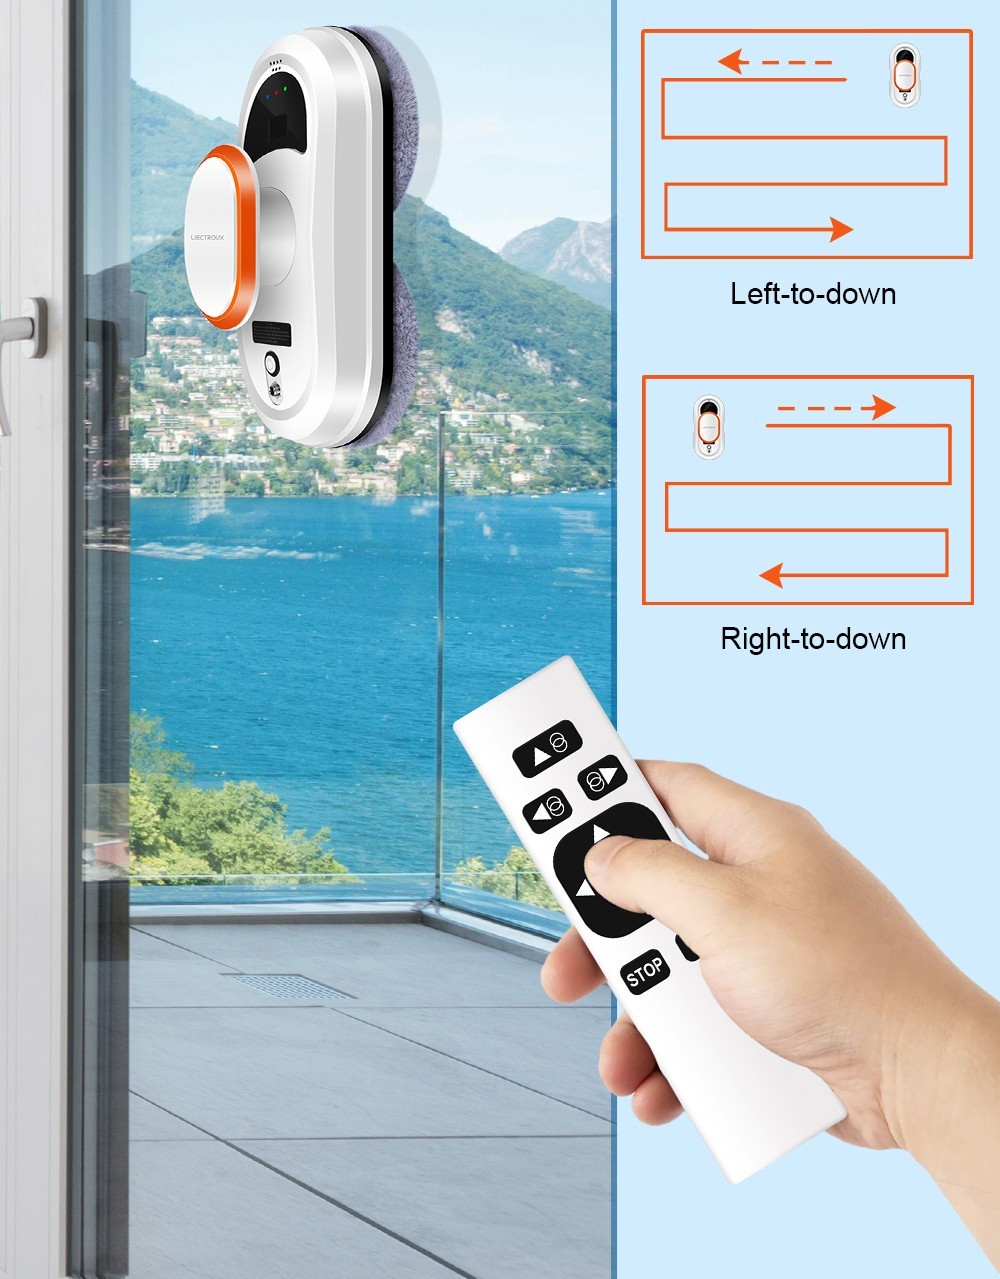 Liectroux HCR-09 Window Cleaning Robot, 2800Pa Suction, 3 Auto Cleaning Modes, UPS Function, Edge Detection, Remote Control